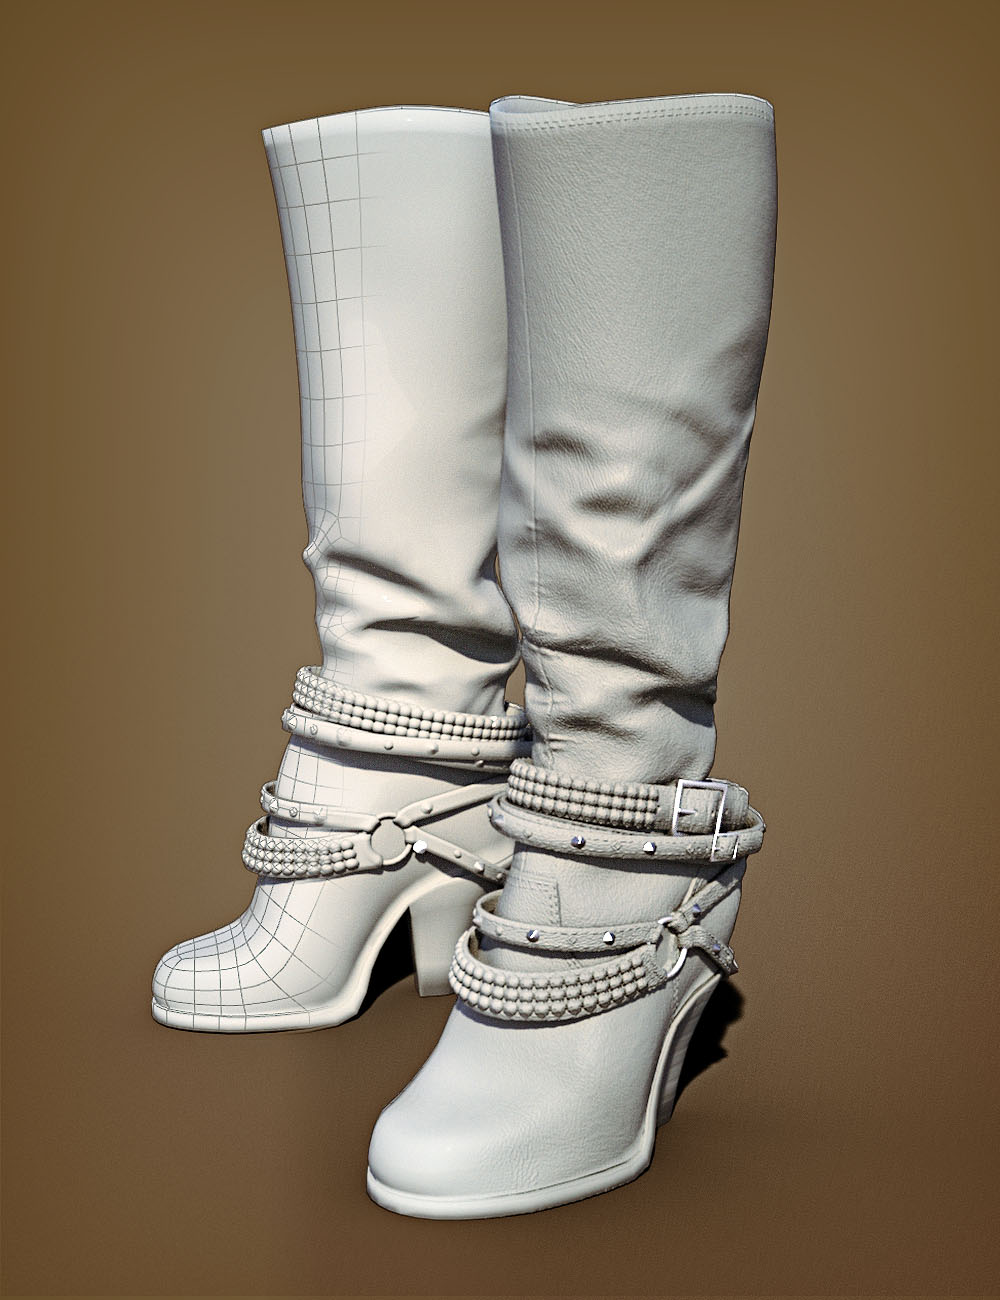 Diamond & Studs Boots for Genesis 3 Female(s) by: chungdan, 3D Models by Daz 3D